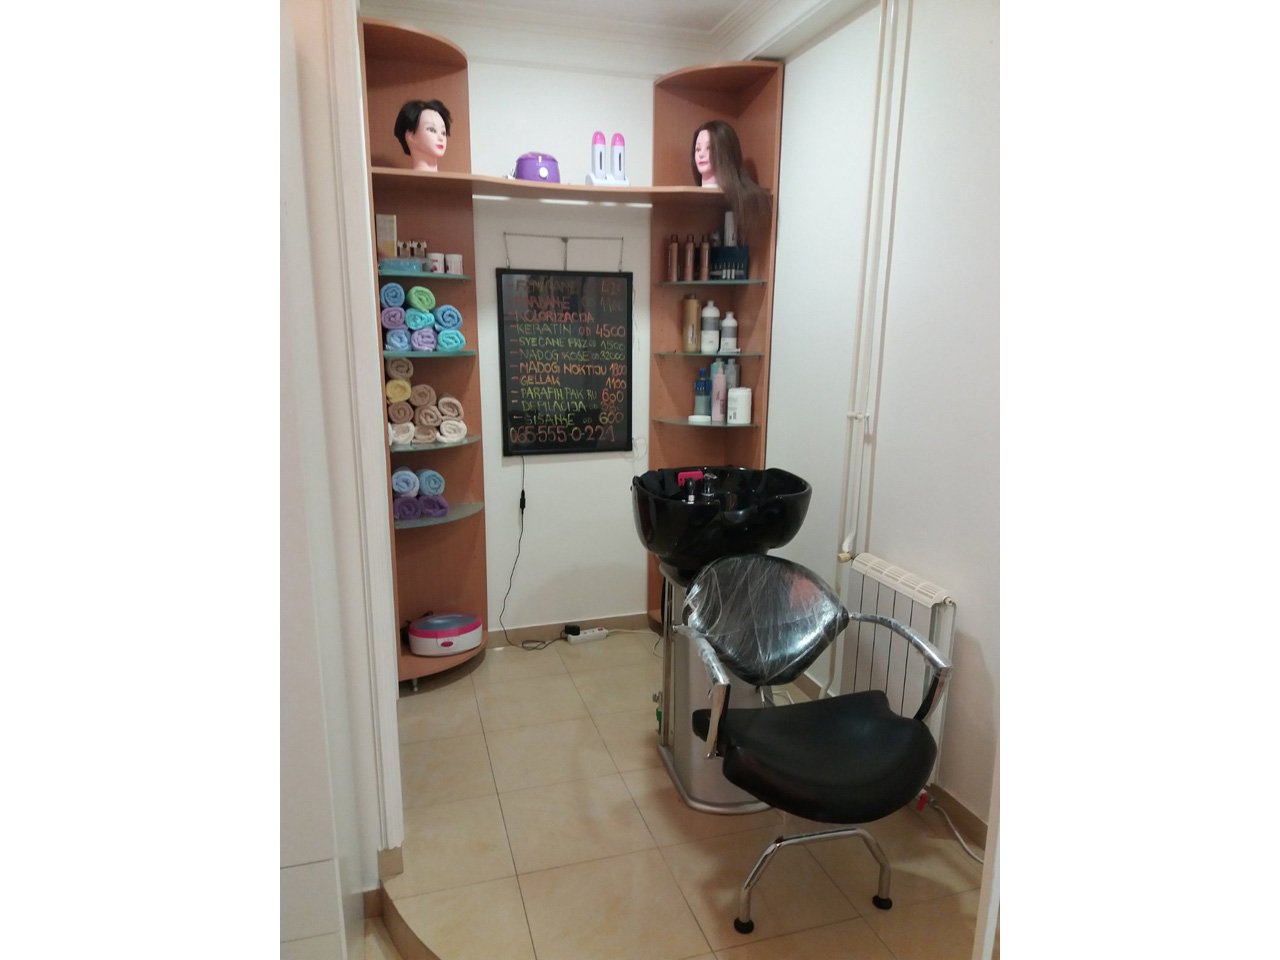 HAIRDRESSING AND BEAUTY STUDIO EMILLY 14 Hairdressers Belgrade - Photo 2